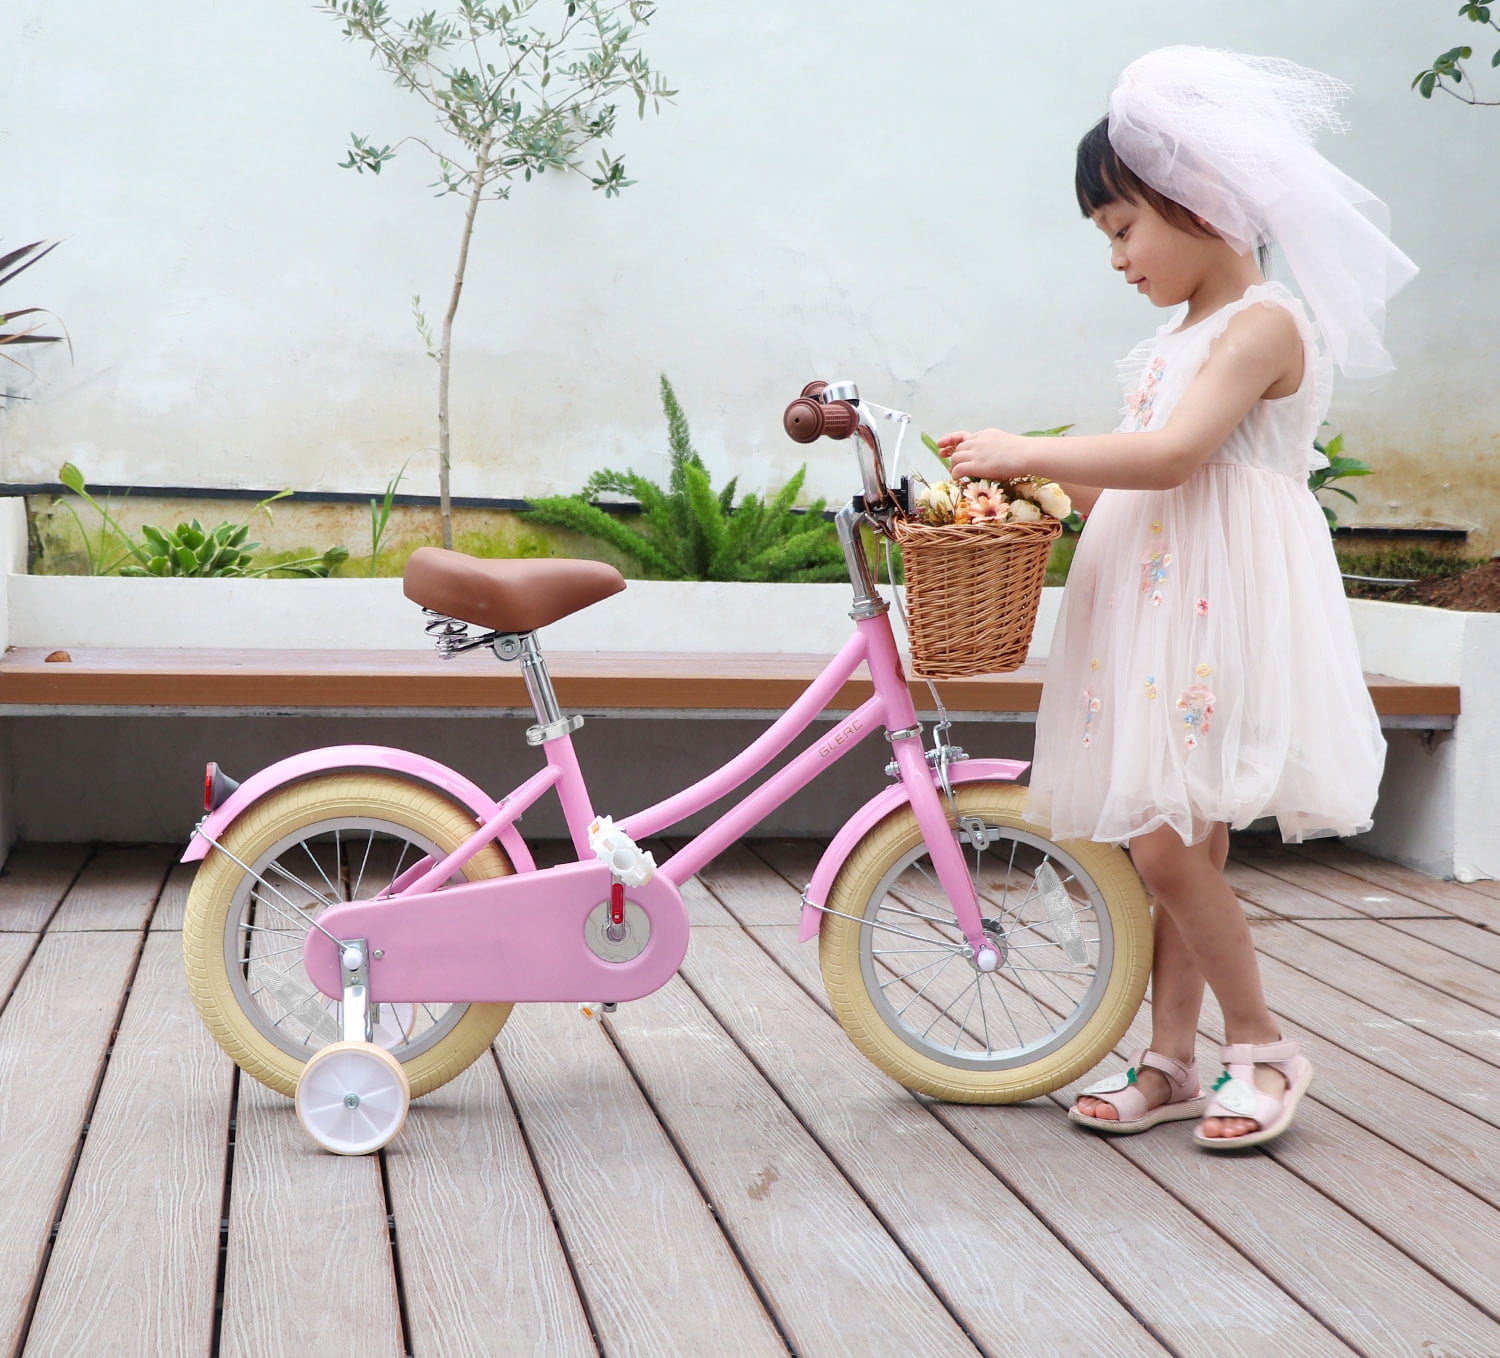 Glerc Little Molly 14 inch Kids Girls Bike for 3-5 Years Old Little Child,Yellow